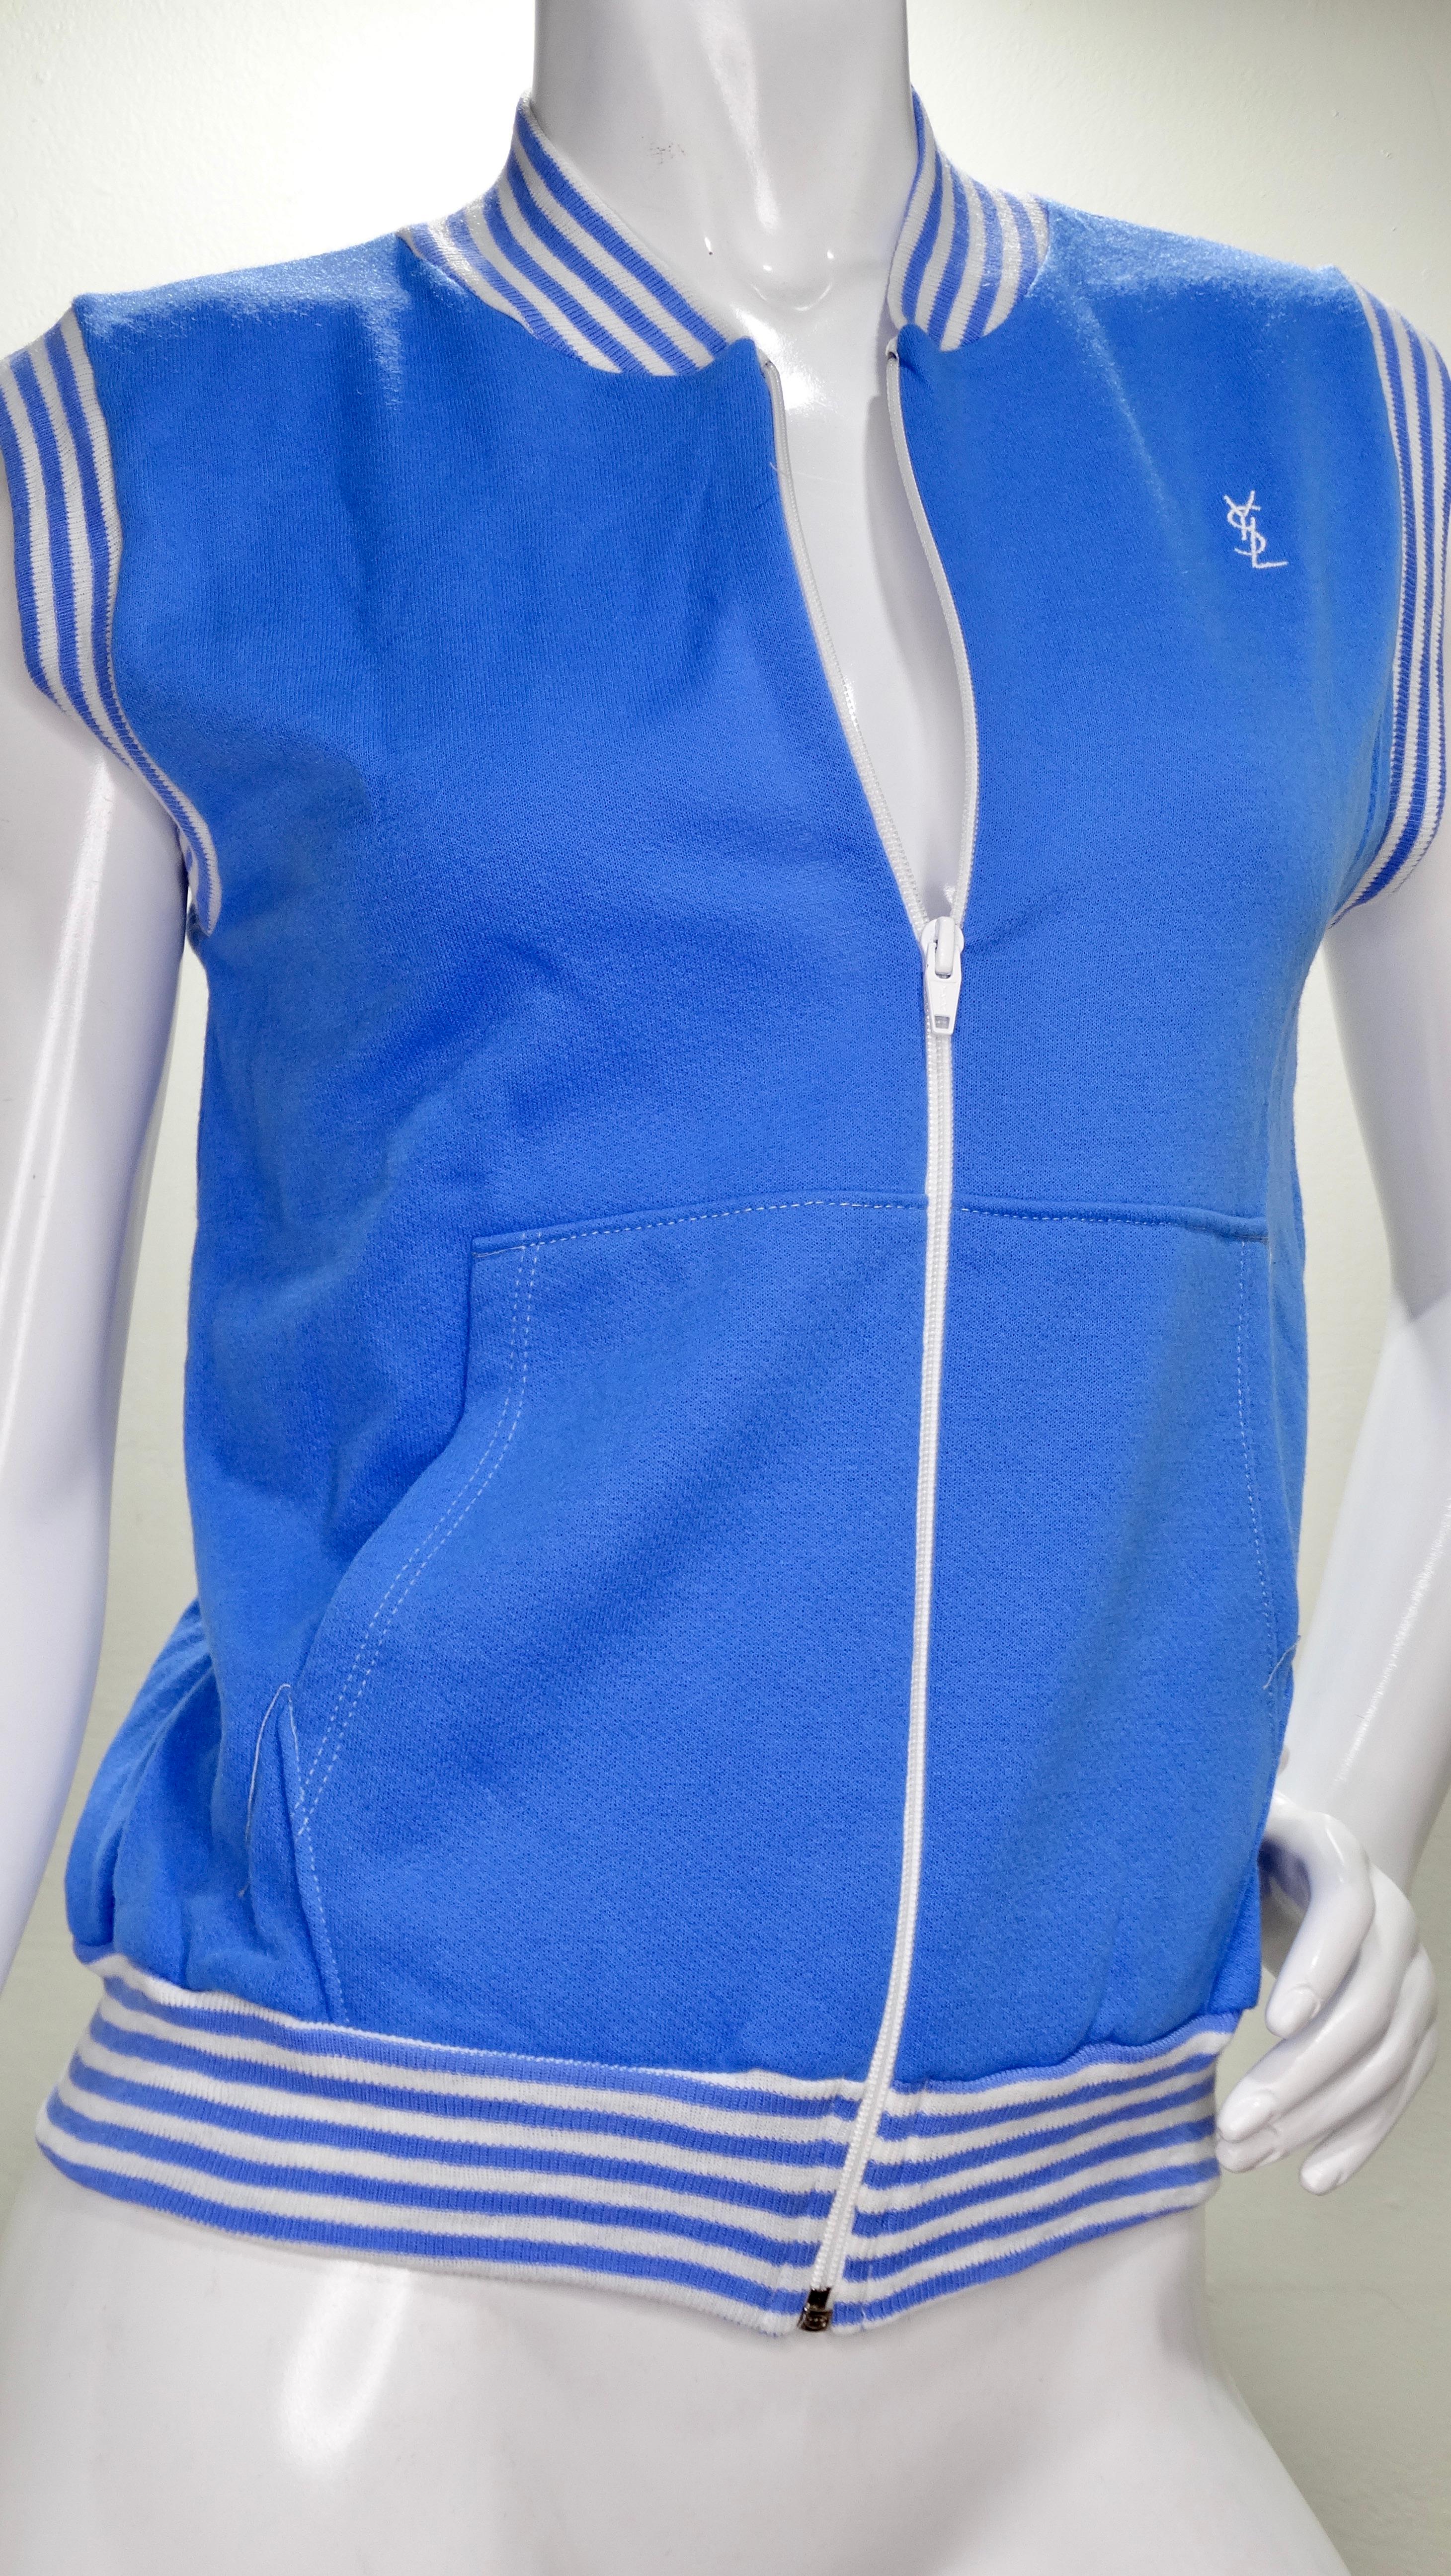 Nobody does it quite like Yves Saint Laurent! Circa early 1970s, this baby blue vest from YSL's activewear line features a blue and white striped hem, YSL logo on the front, two front pockets and a white zipper closure. Original tag intact, marked a